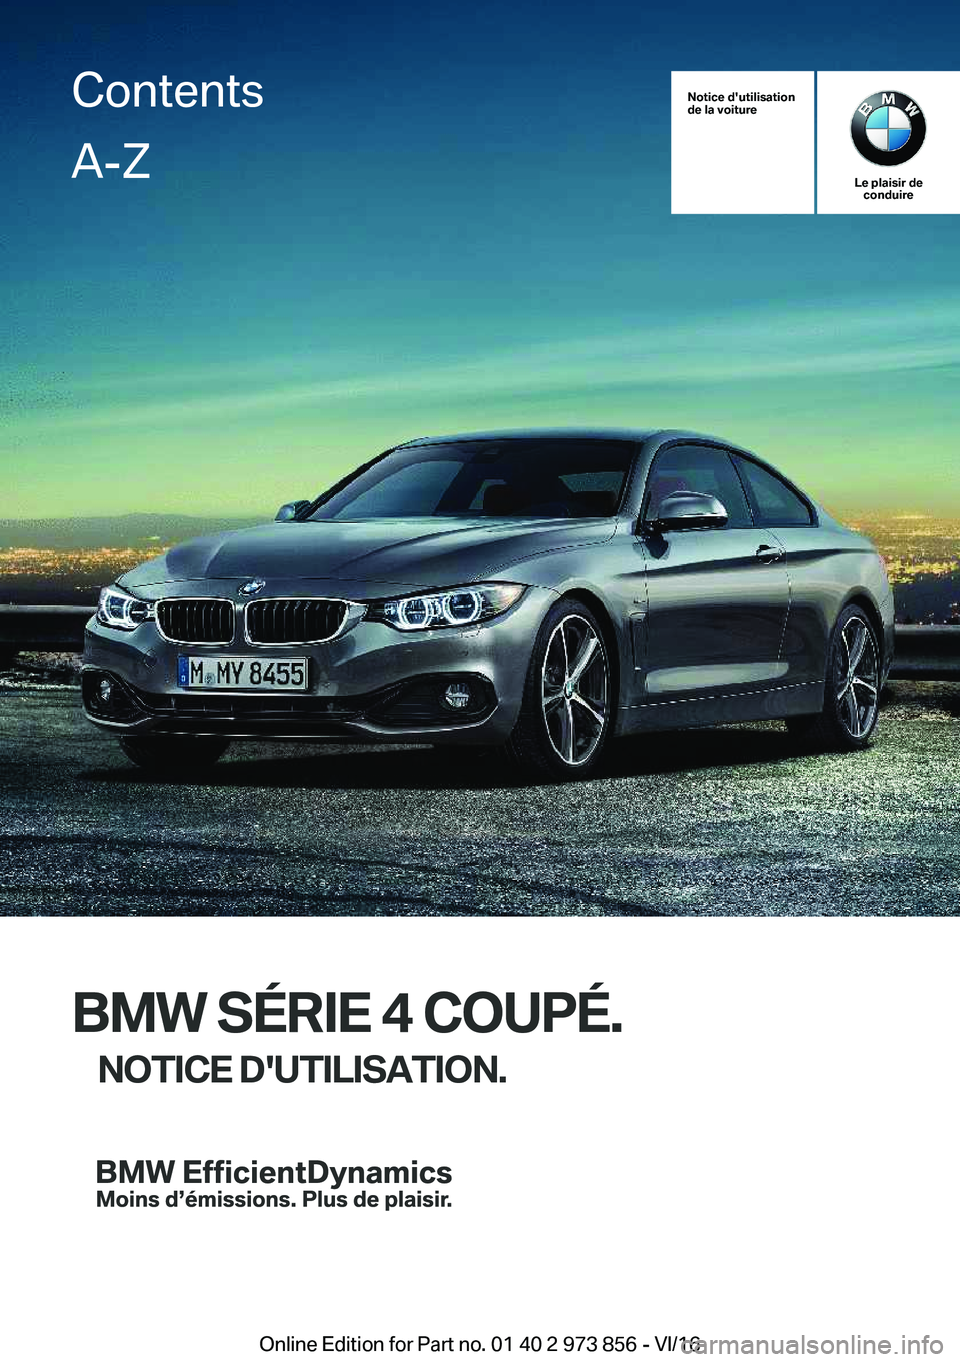 BMW 4 SERIES COUPE 2017  Notices Demploi (in French) �N�o�t�i�c�e��d�'�u�t�i�l�i�s�a�t�i�o�n
�d�e��l�a��v�o�i�t�u�r�e
�L�e��p�l�a�i�s�i�r��d�e �c�o�n�d�u�i�r�e
�B�M�W��S�